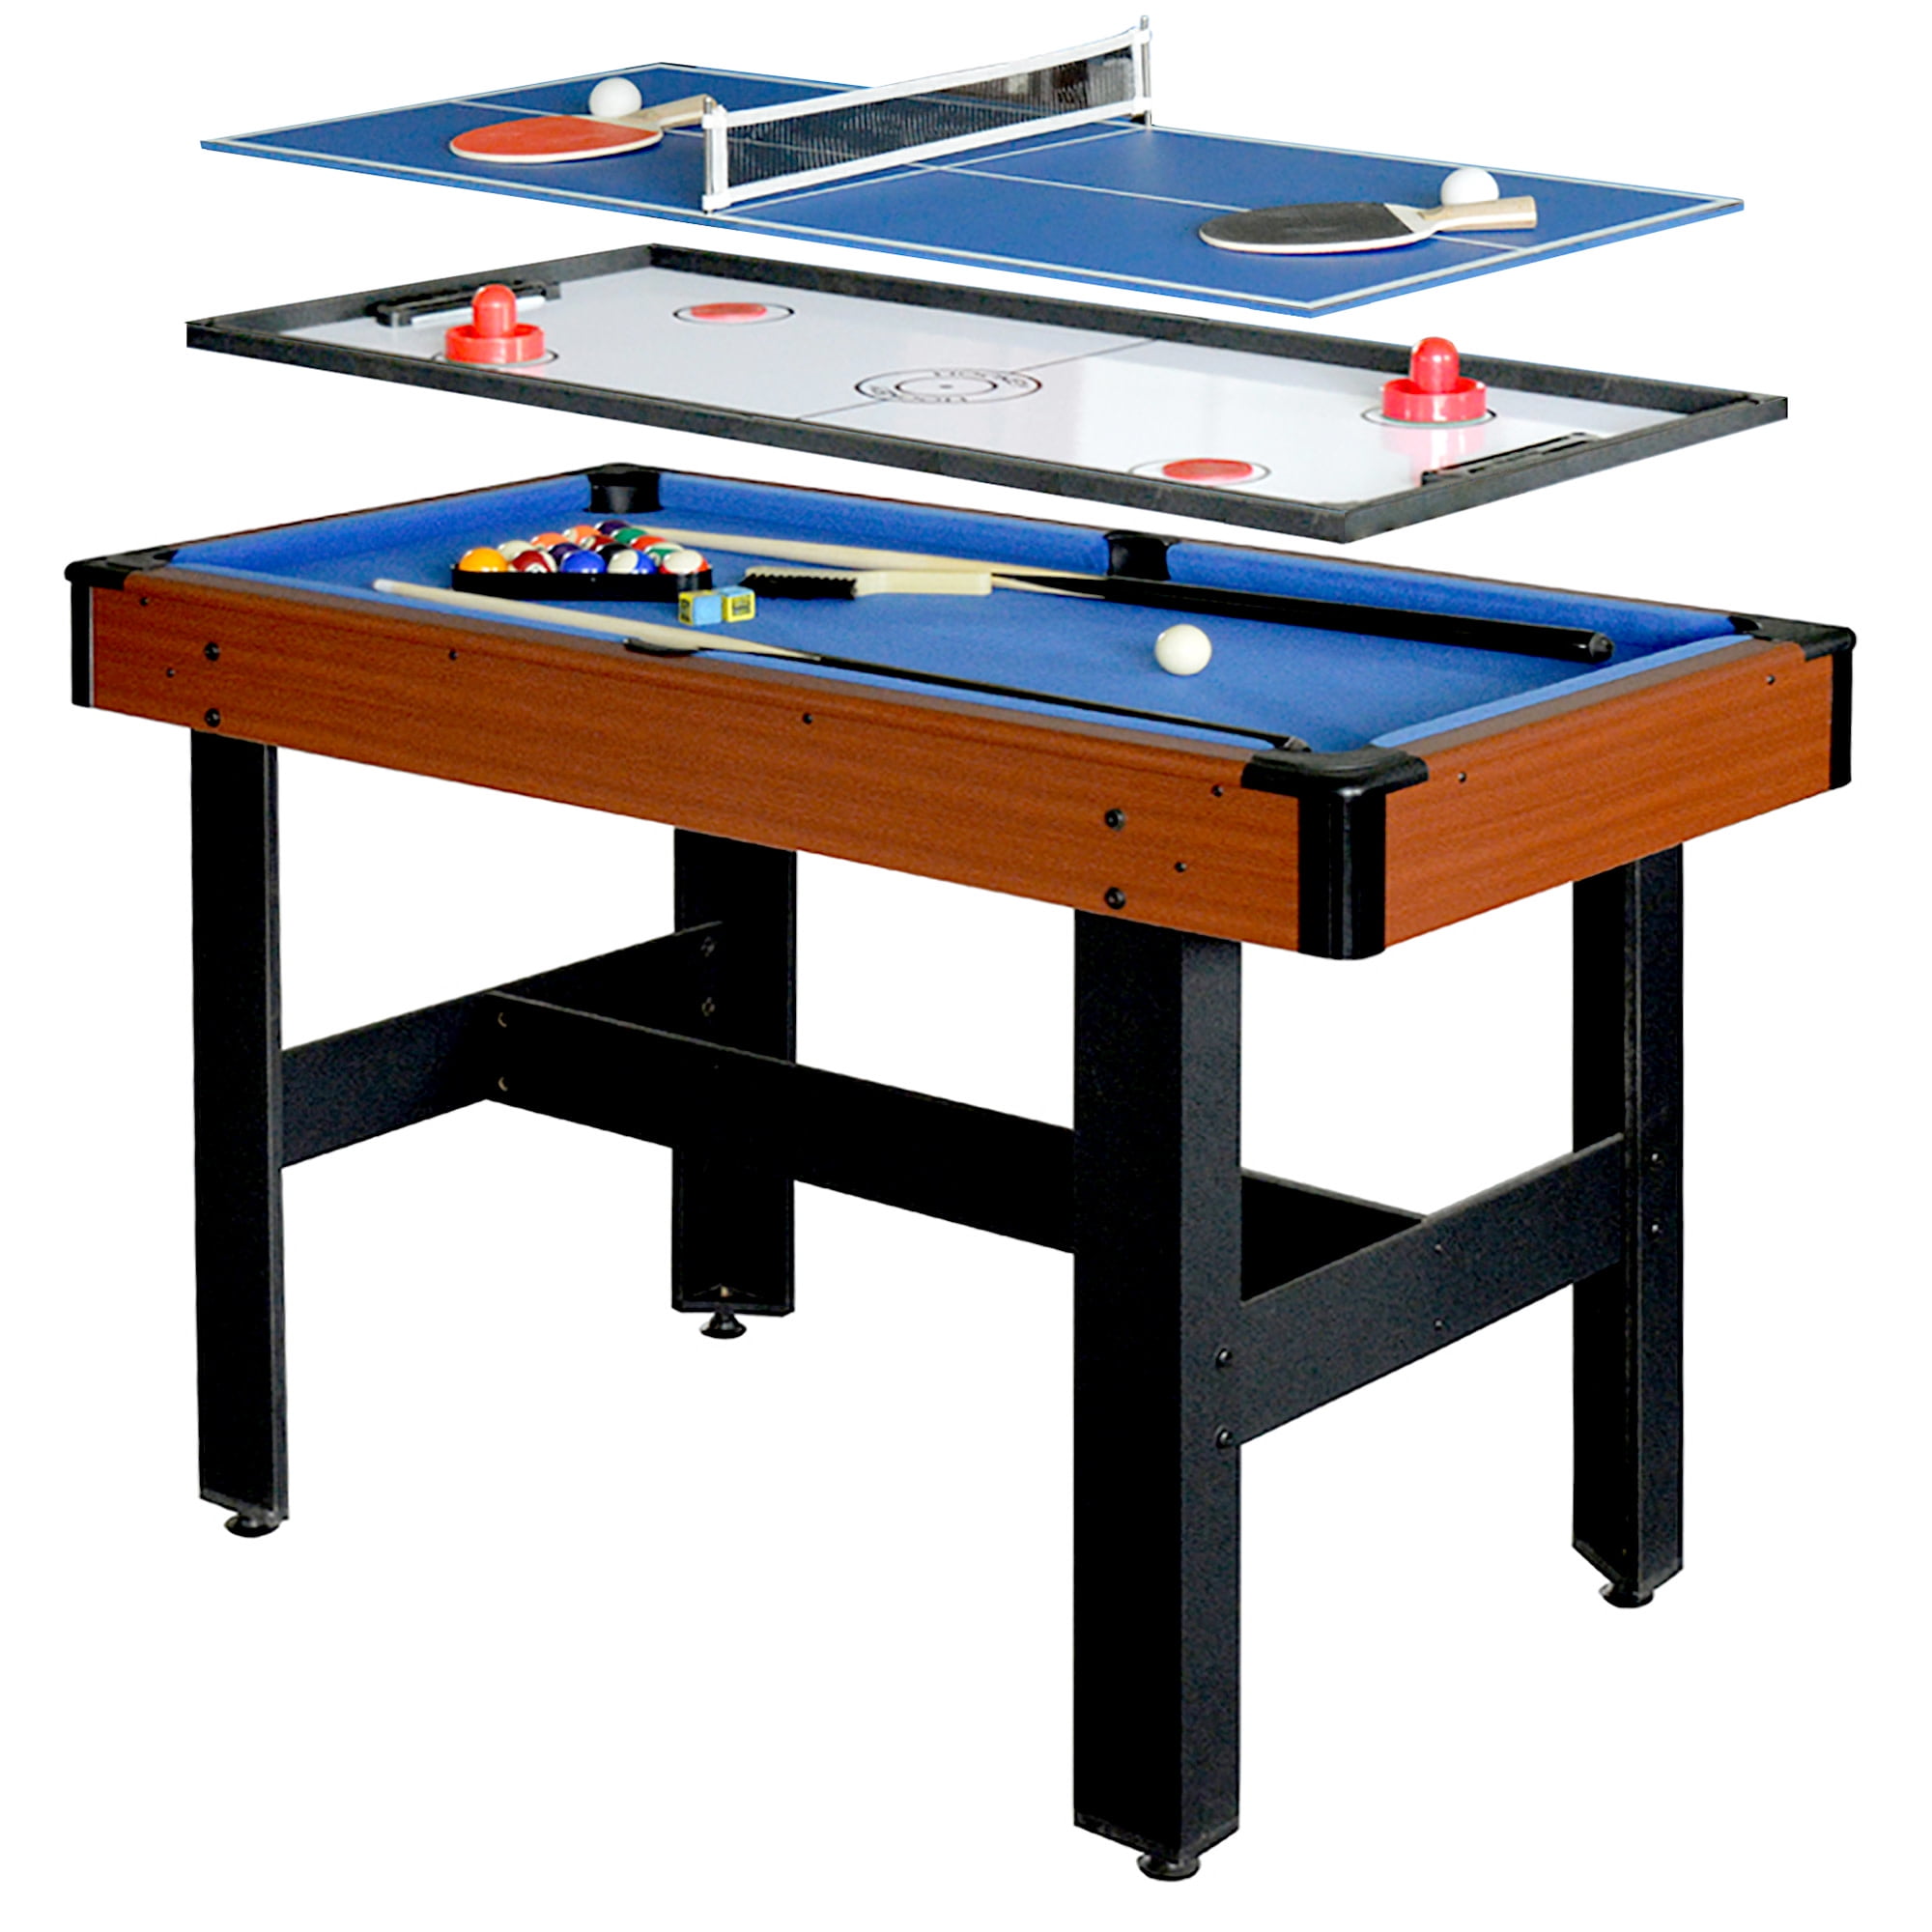 Tennis Table Finger Shoot Basketball 4 in1 Combo Game Table Hockey Billiards 